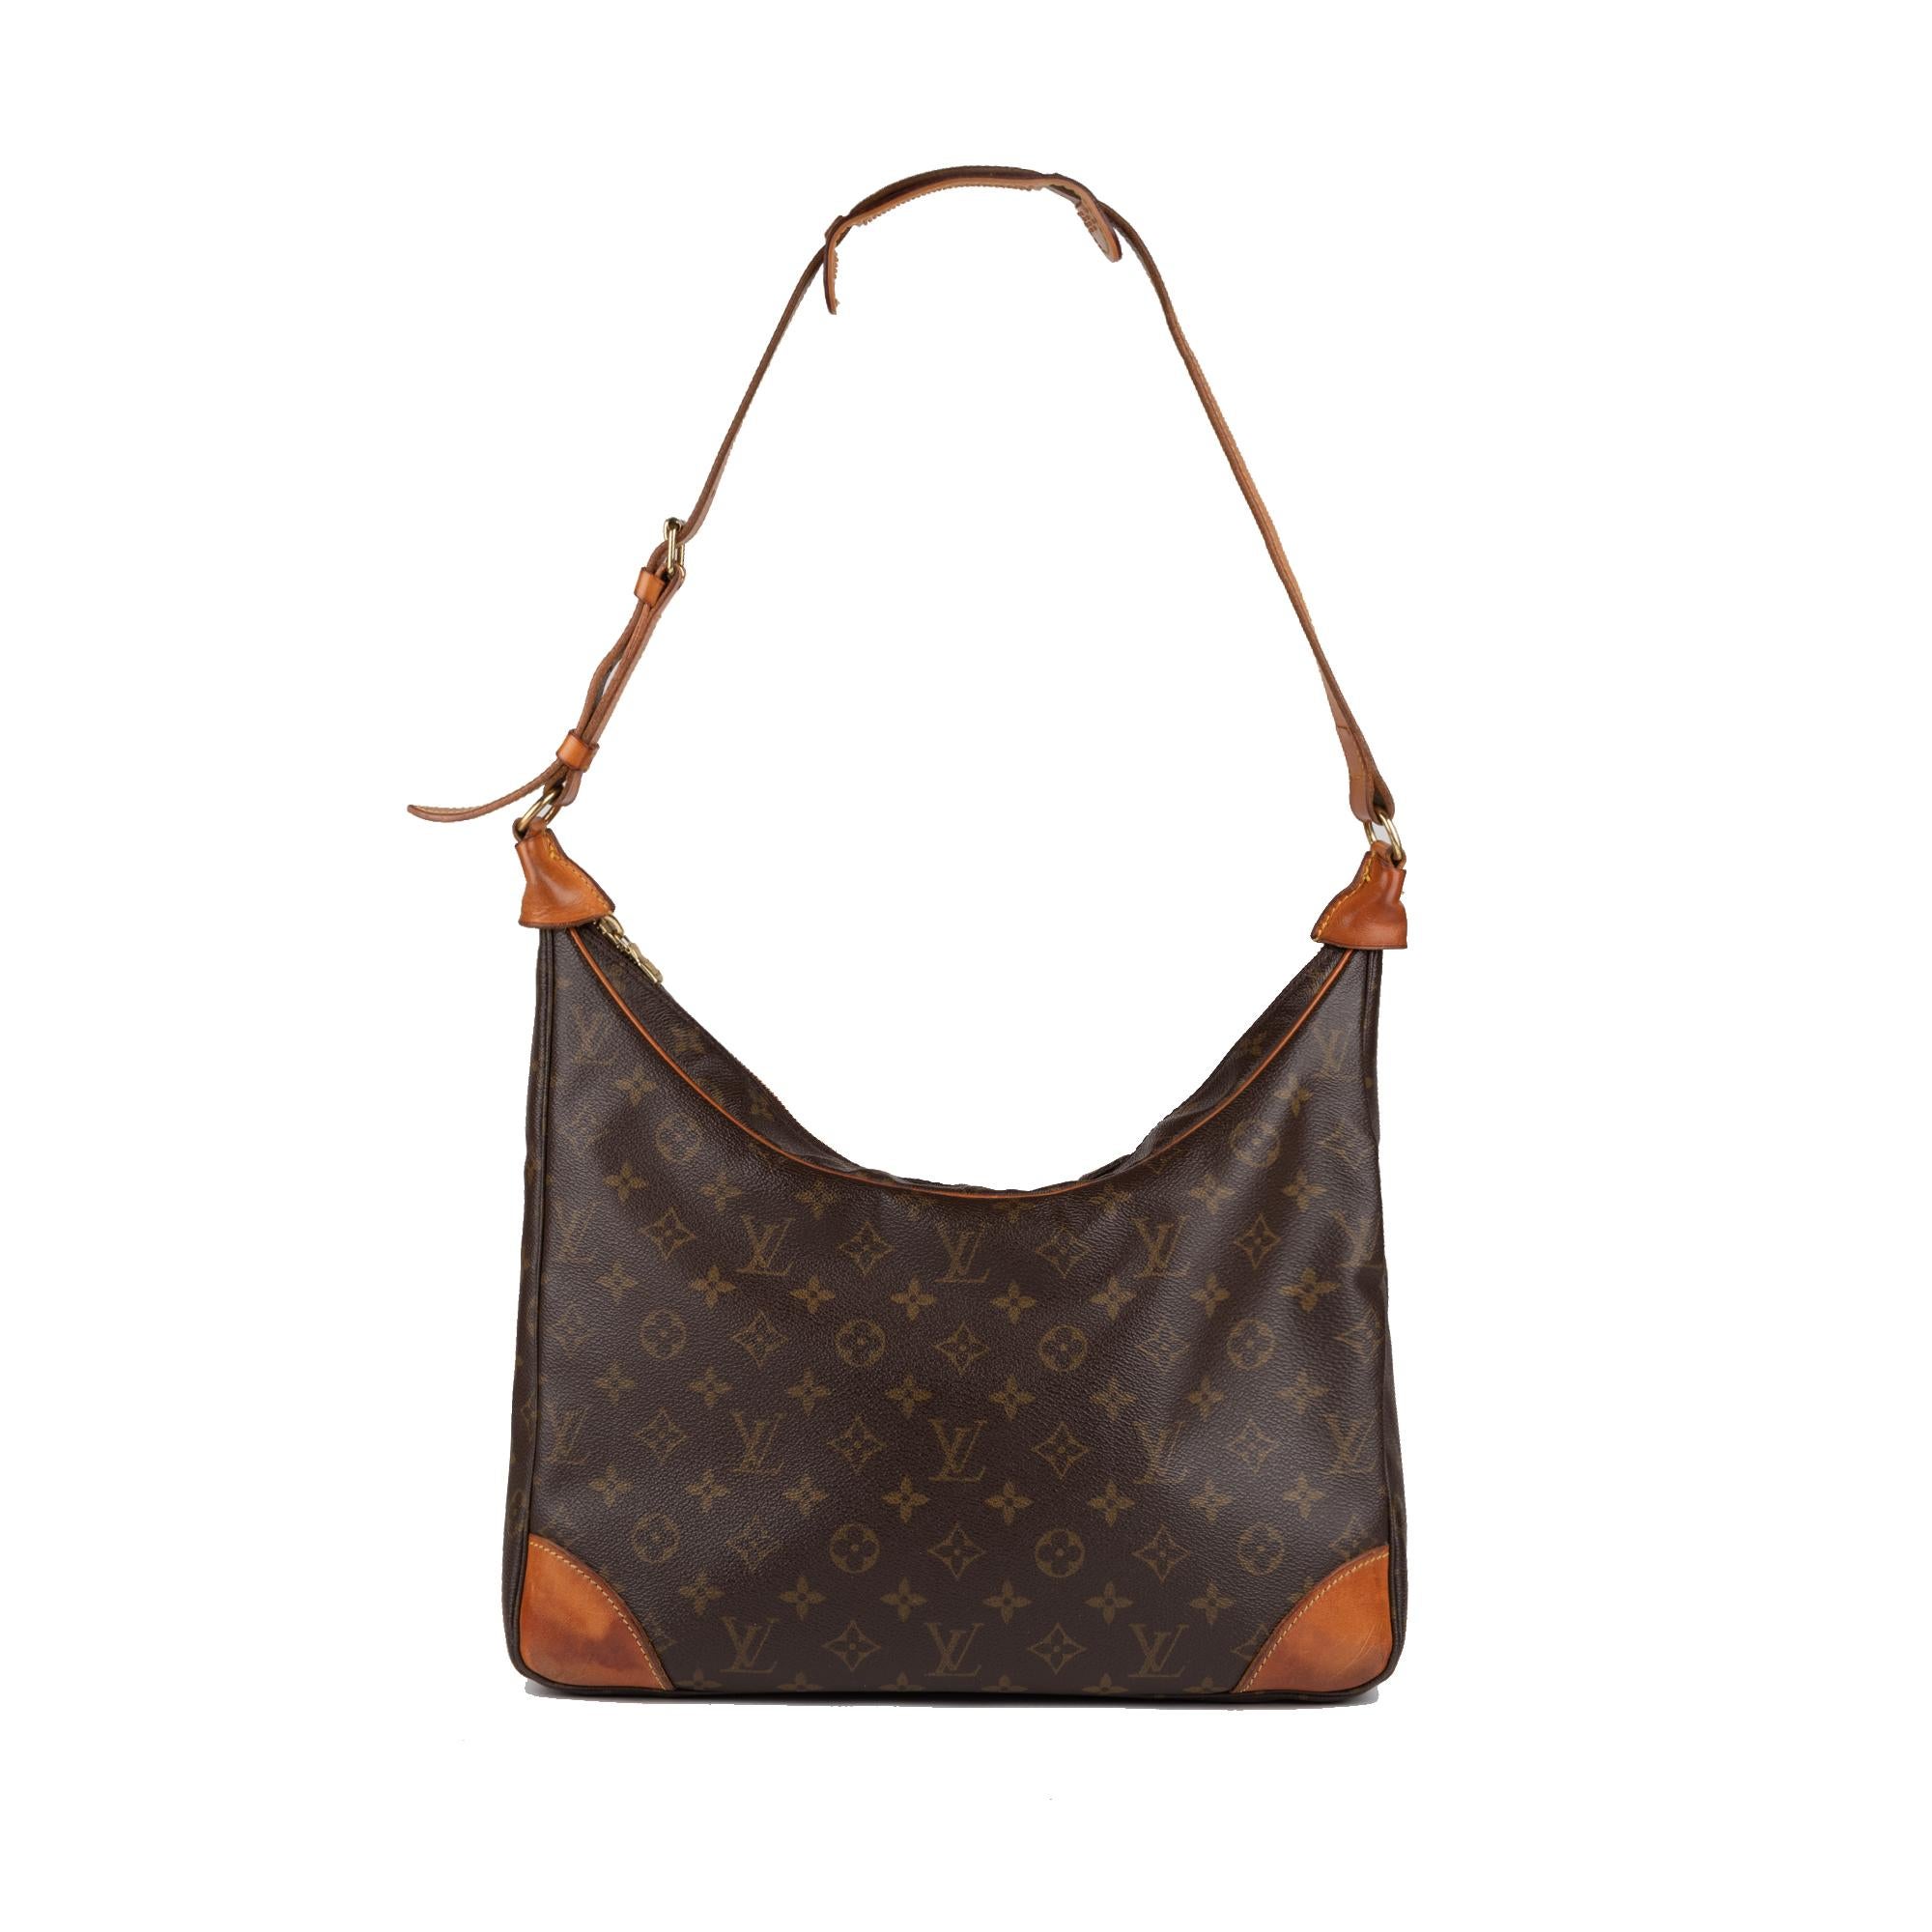 Very handy Louis Vuitton Boulogne handbag in brown and natural leather coated monogram canvas, gold metal trim, yellow stitching, adjustable handle in natural leather allowing a hand or shoulder carry. A zipper closure. Brown leather lining, zipped